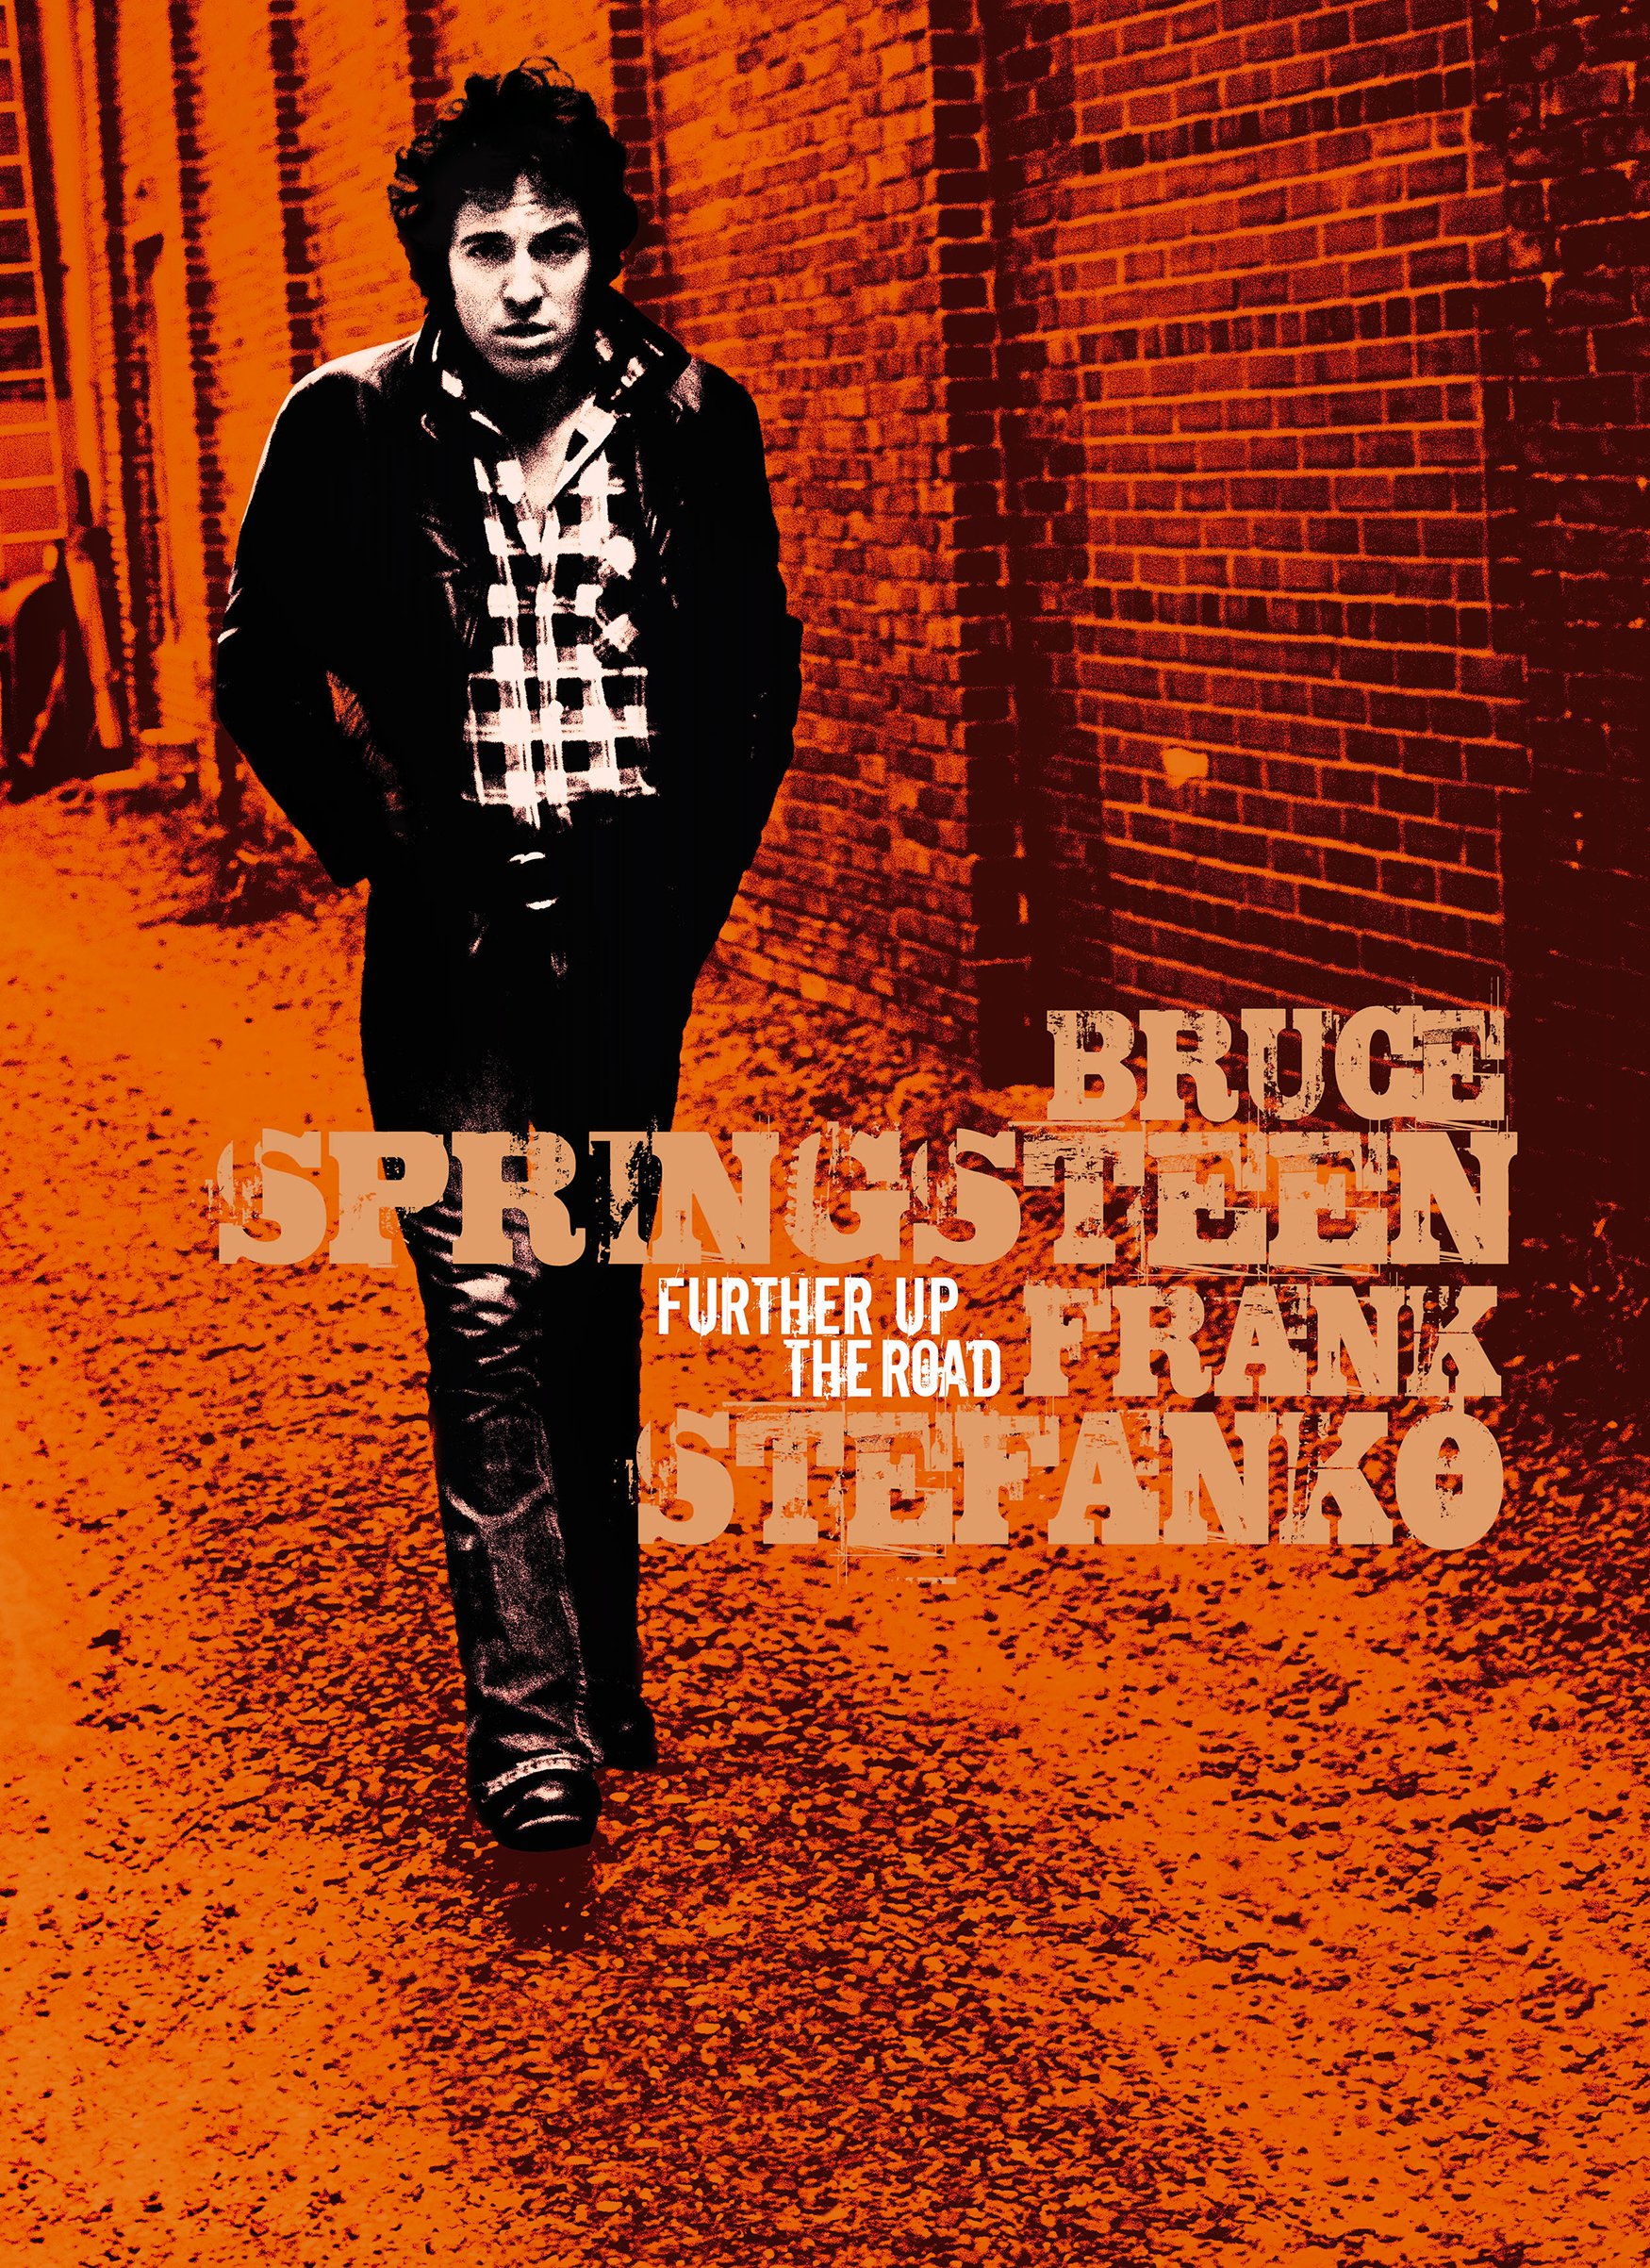 Bruce Springsteen. Further Up The Road is published by Wall of Sound Editions.